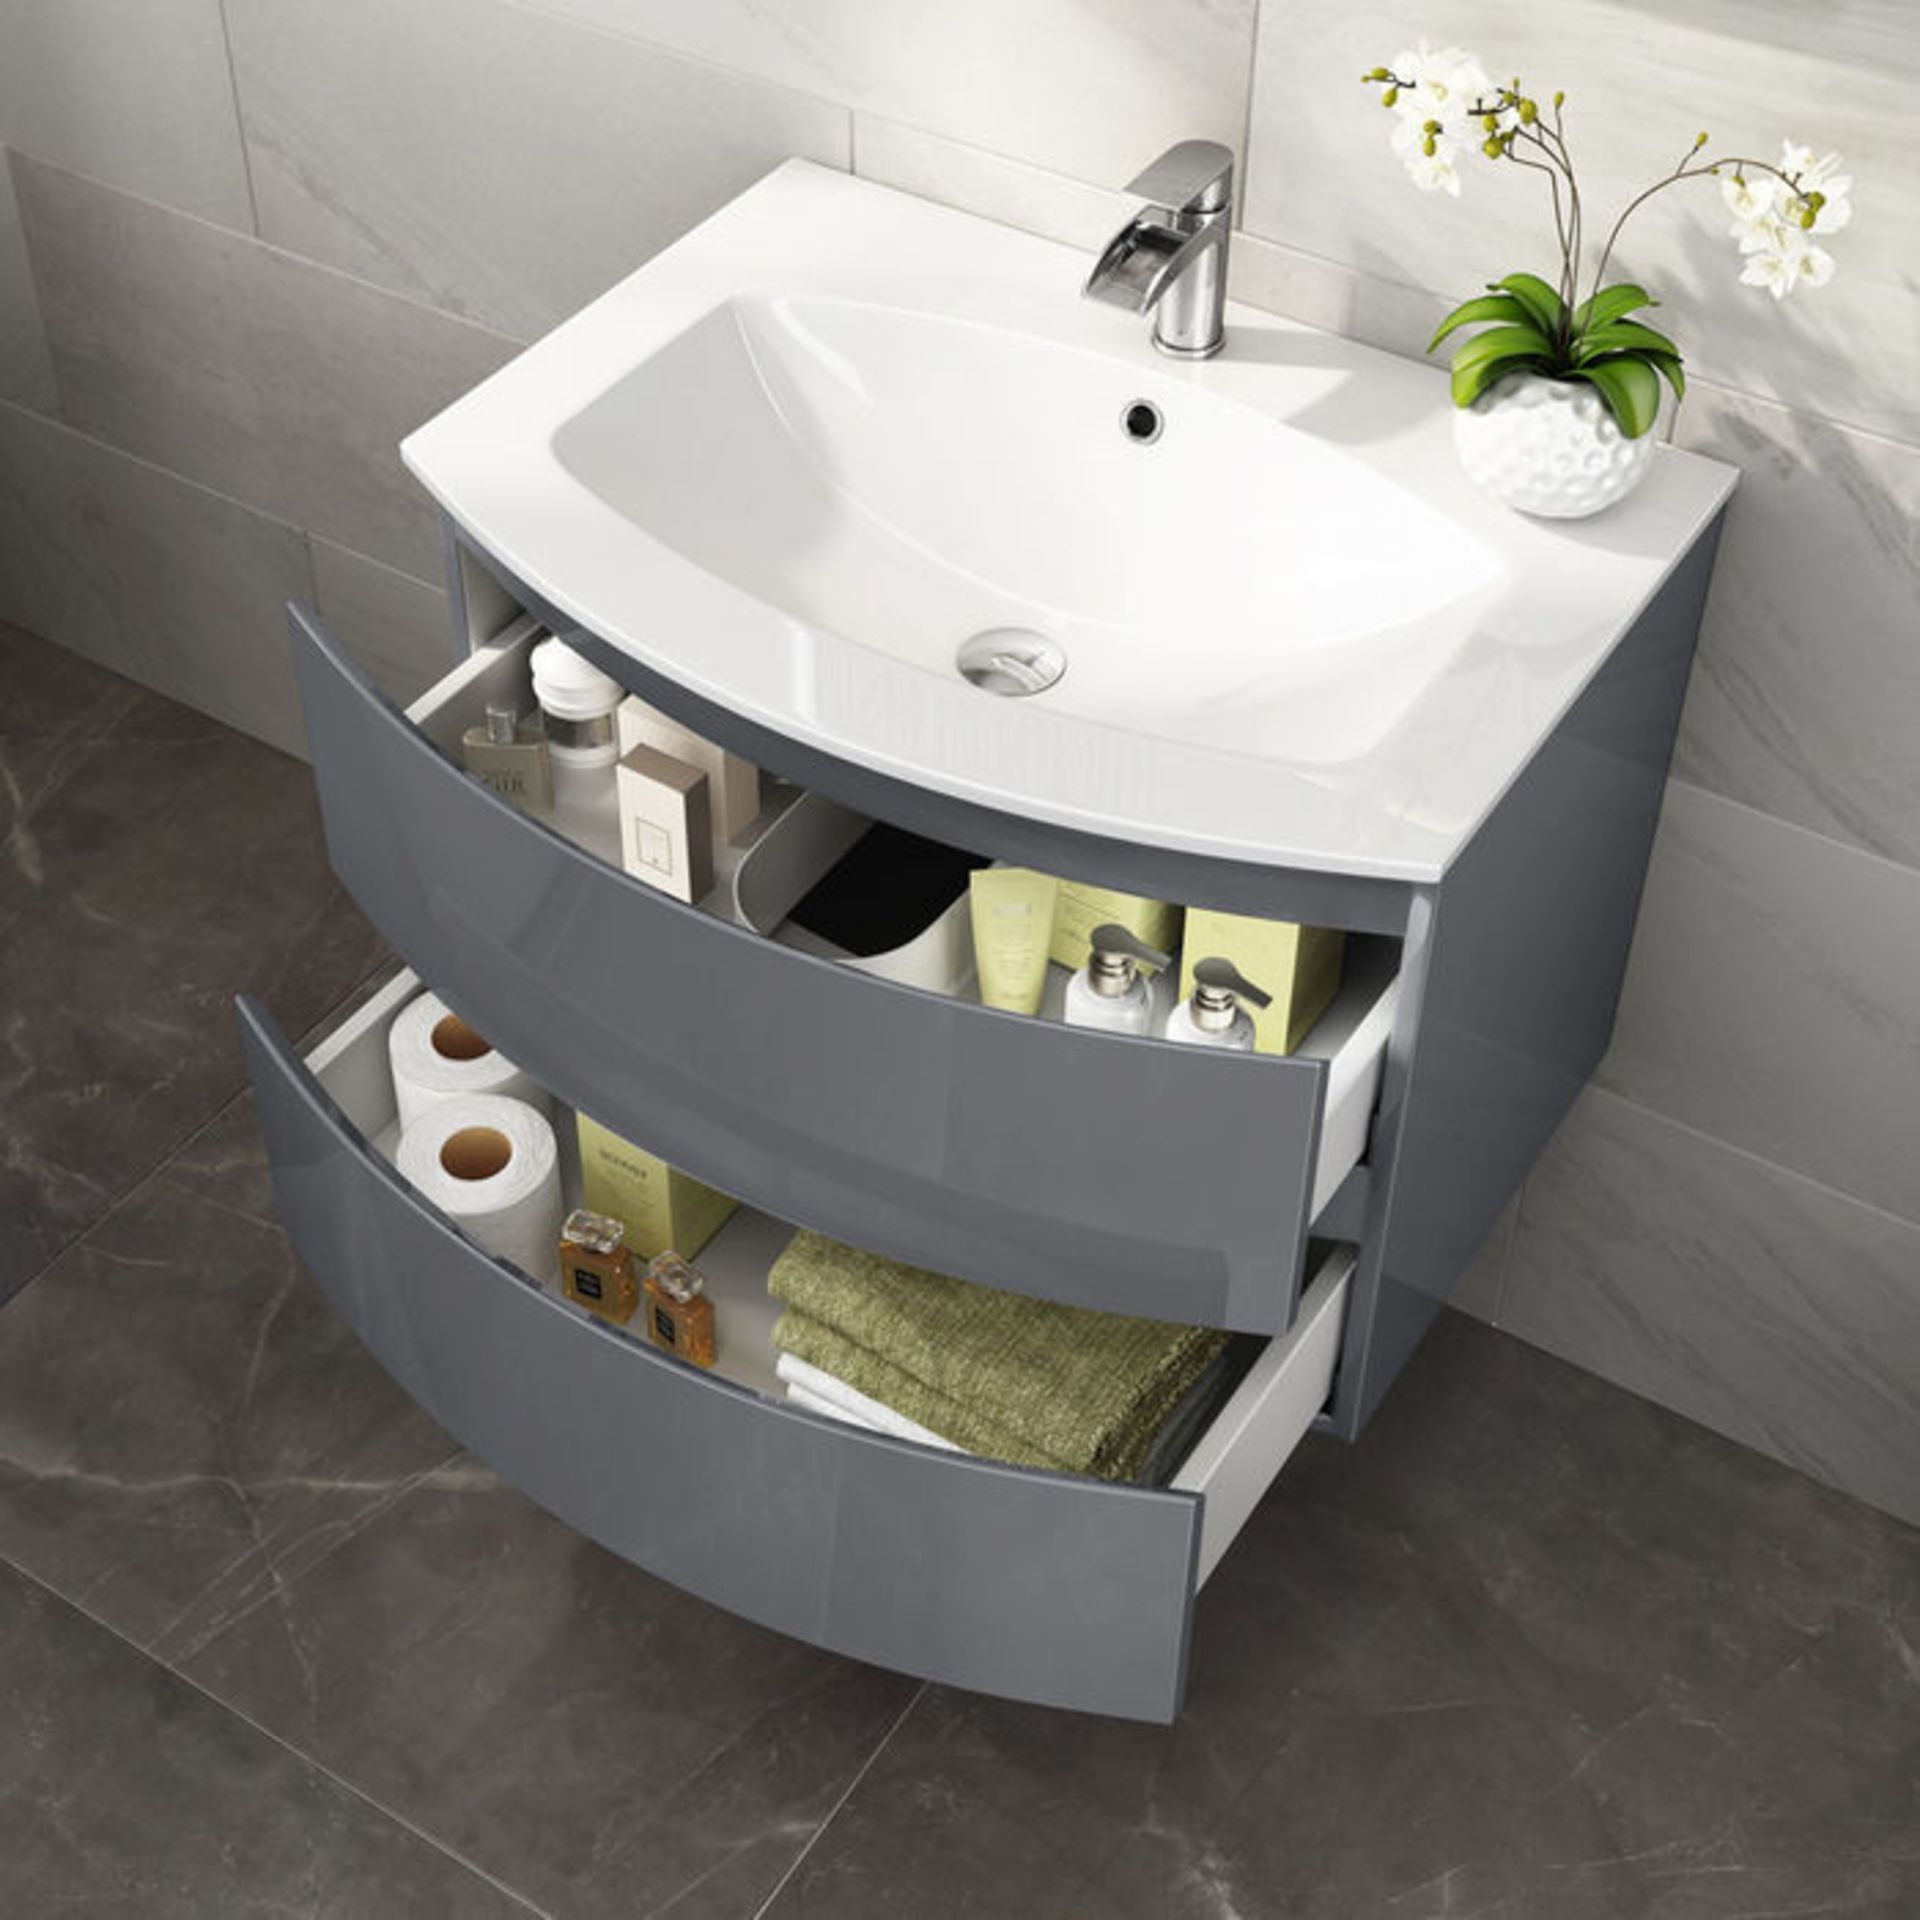 New & Boxed 700mm Amelie Gloss Grey Curved Vanity Unit - Wall Hung. RRP £999.99.Comes Complete With - Image 2 of 2